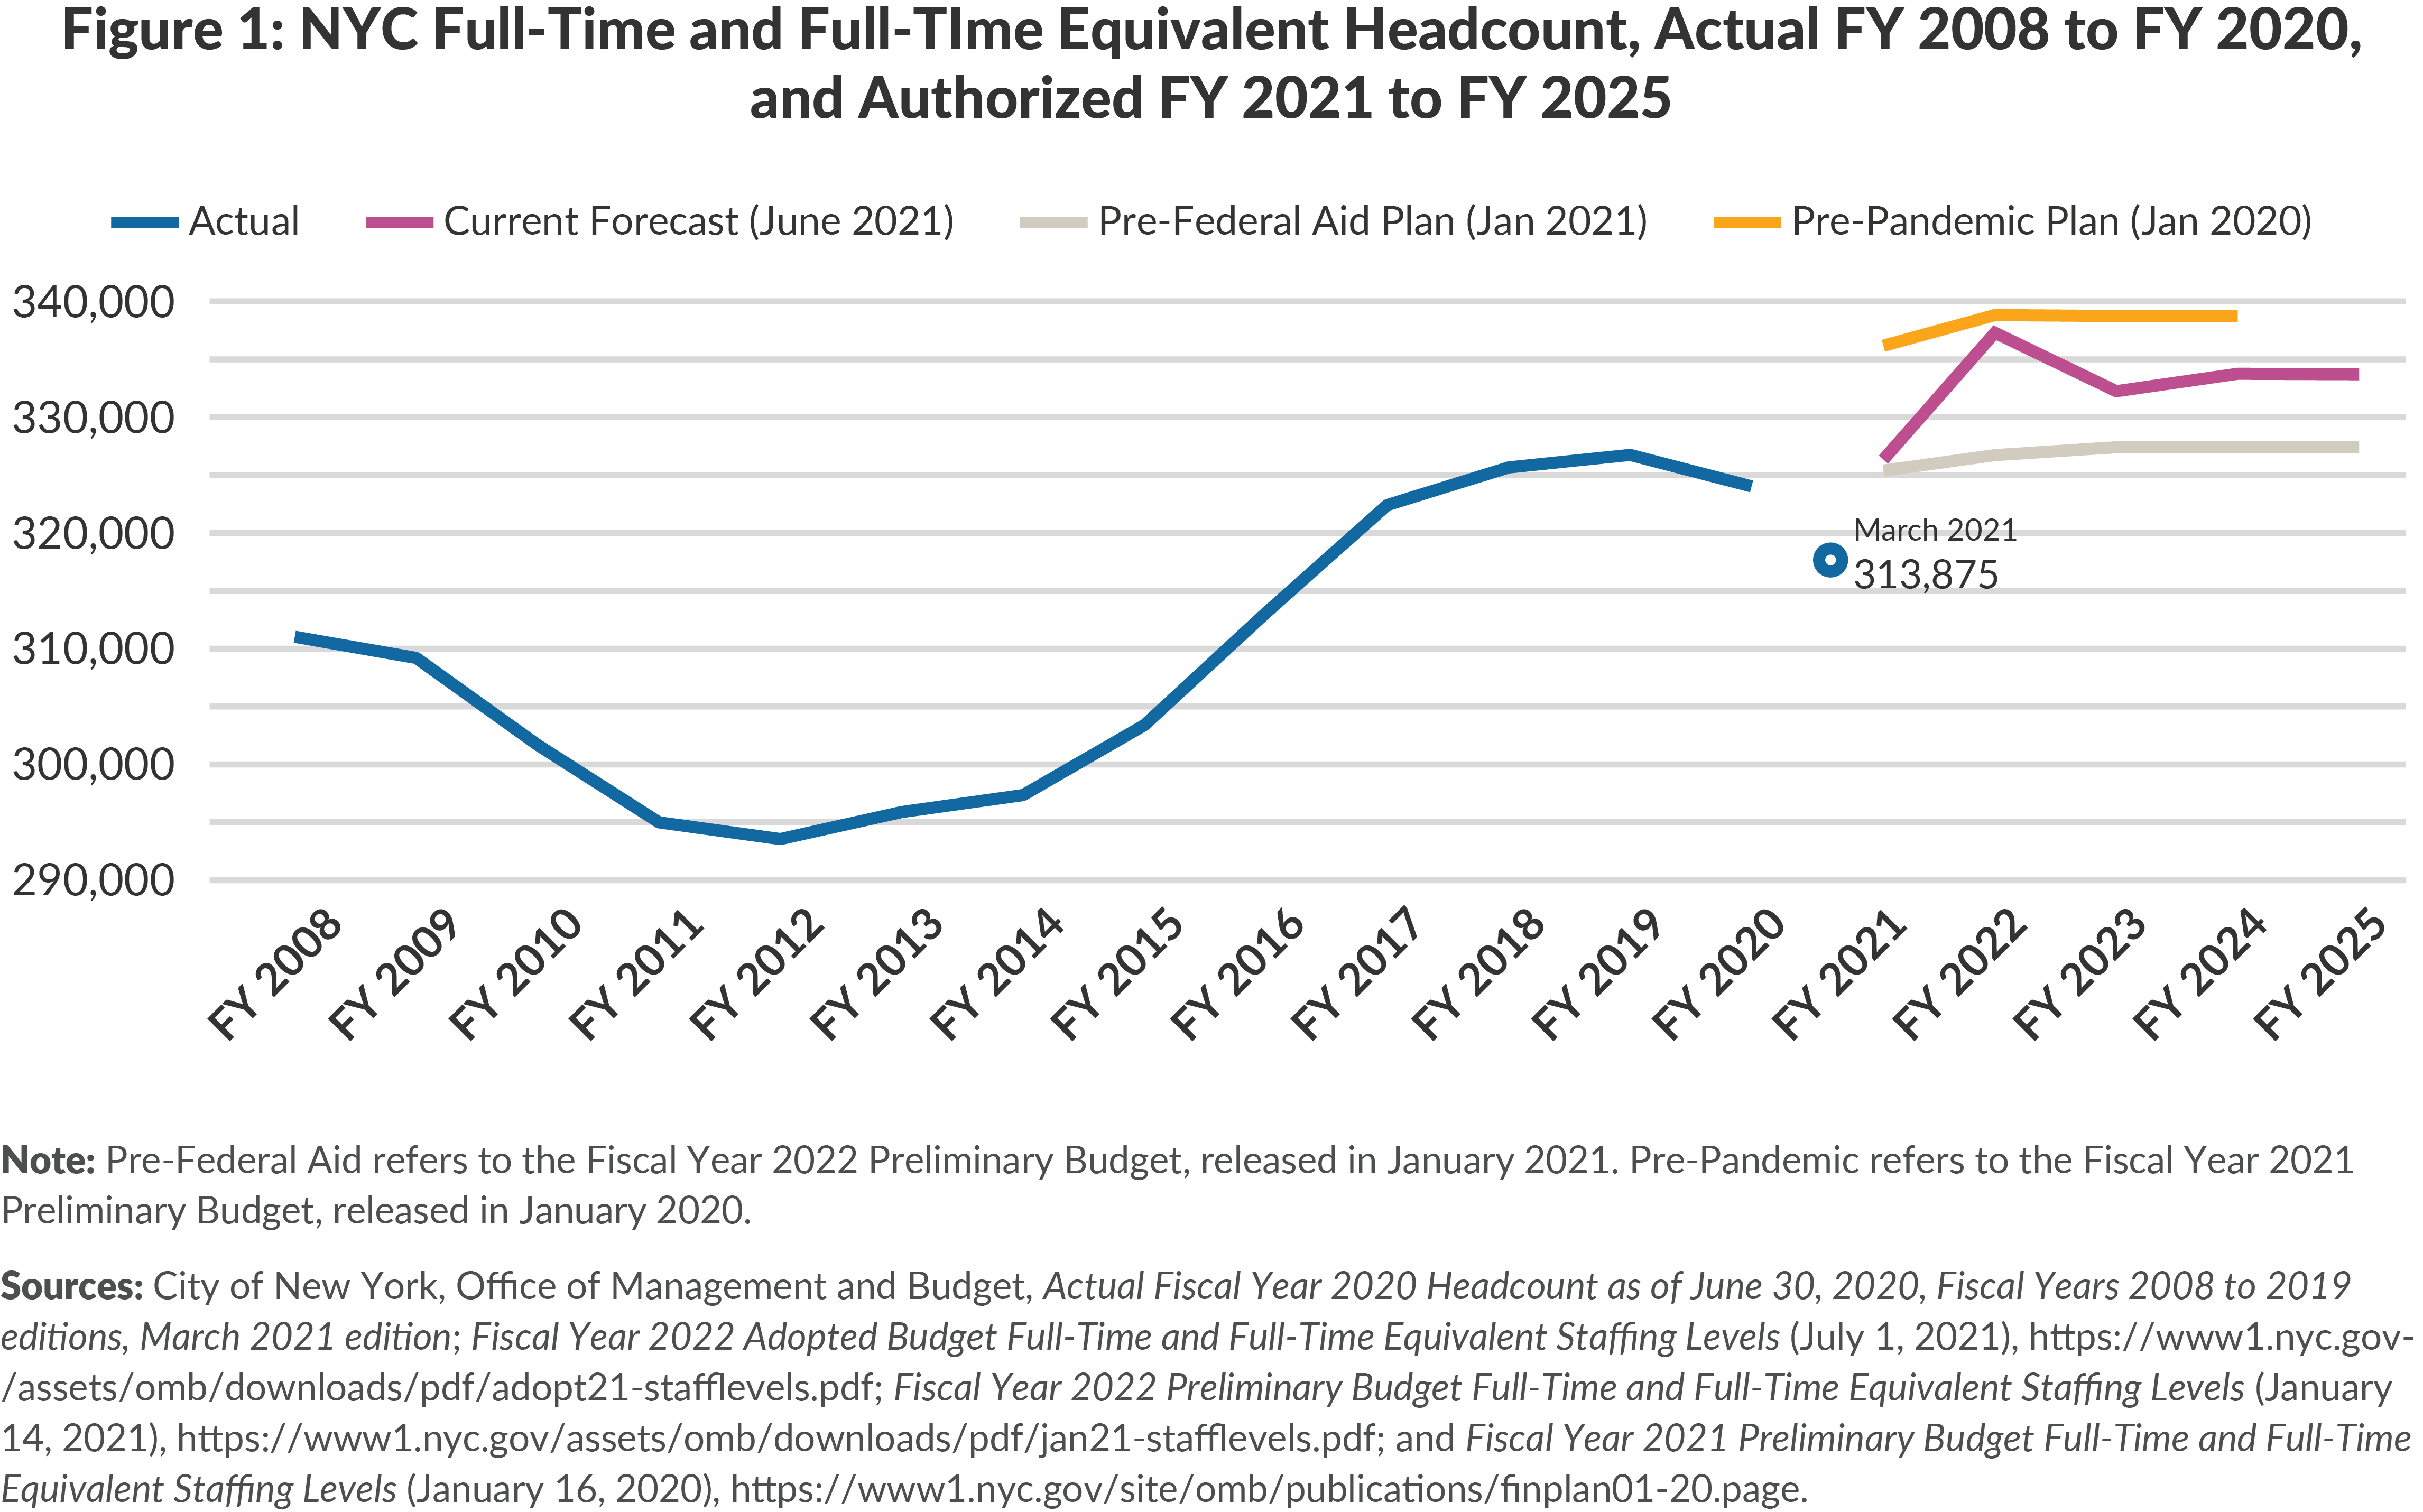 Figure 1. NYC Actual Full-Time and Full-Time Equivalent Headcount, FY2008 to FY2020, and Authorized Headcount, FY2021 to FY2025